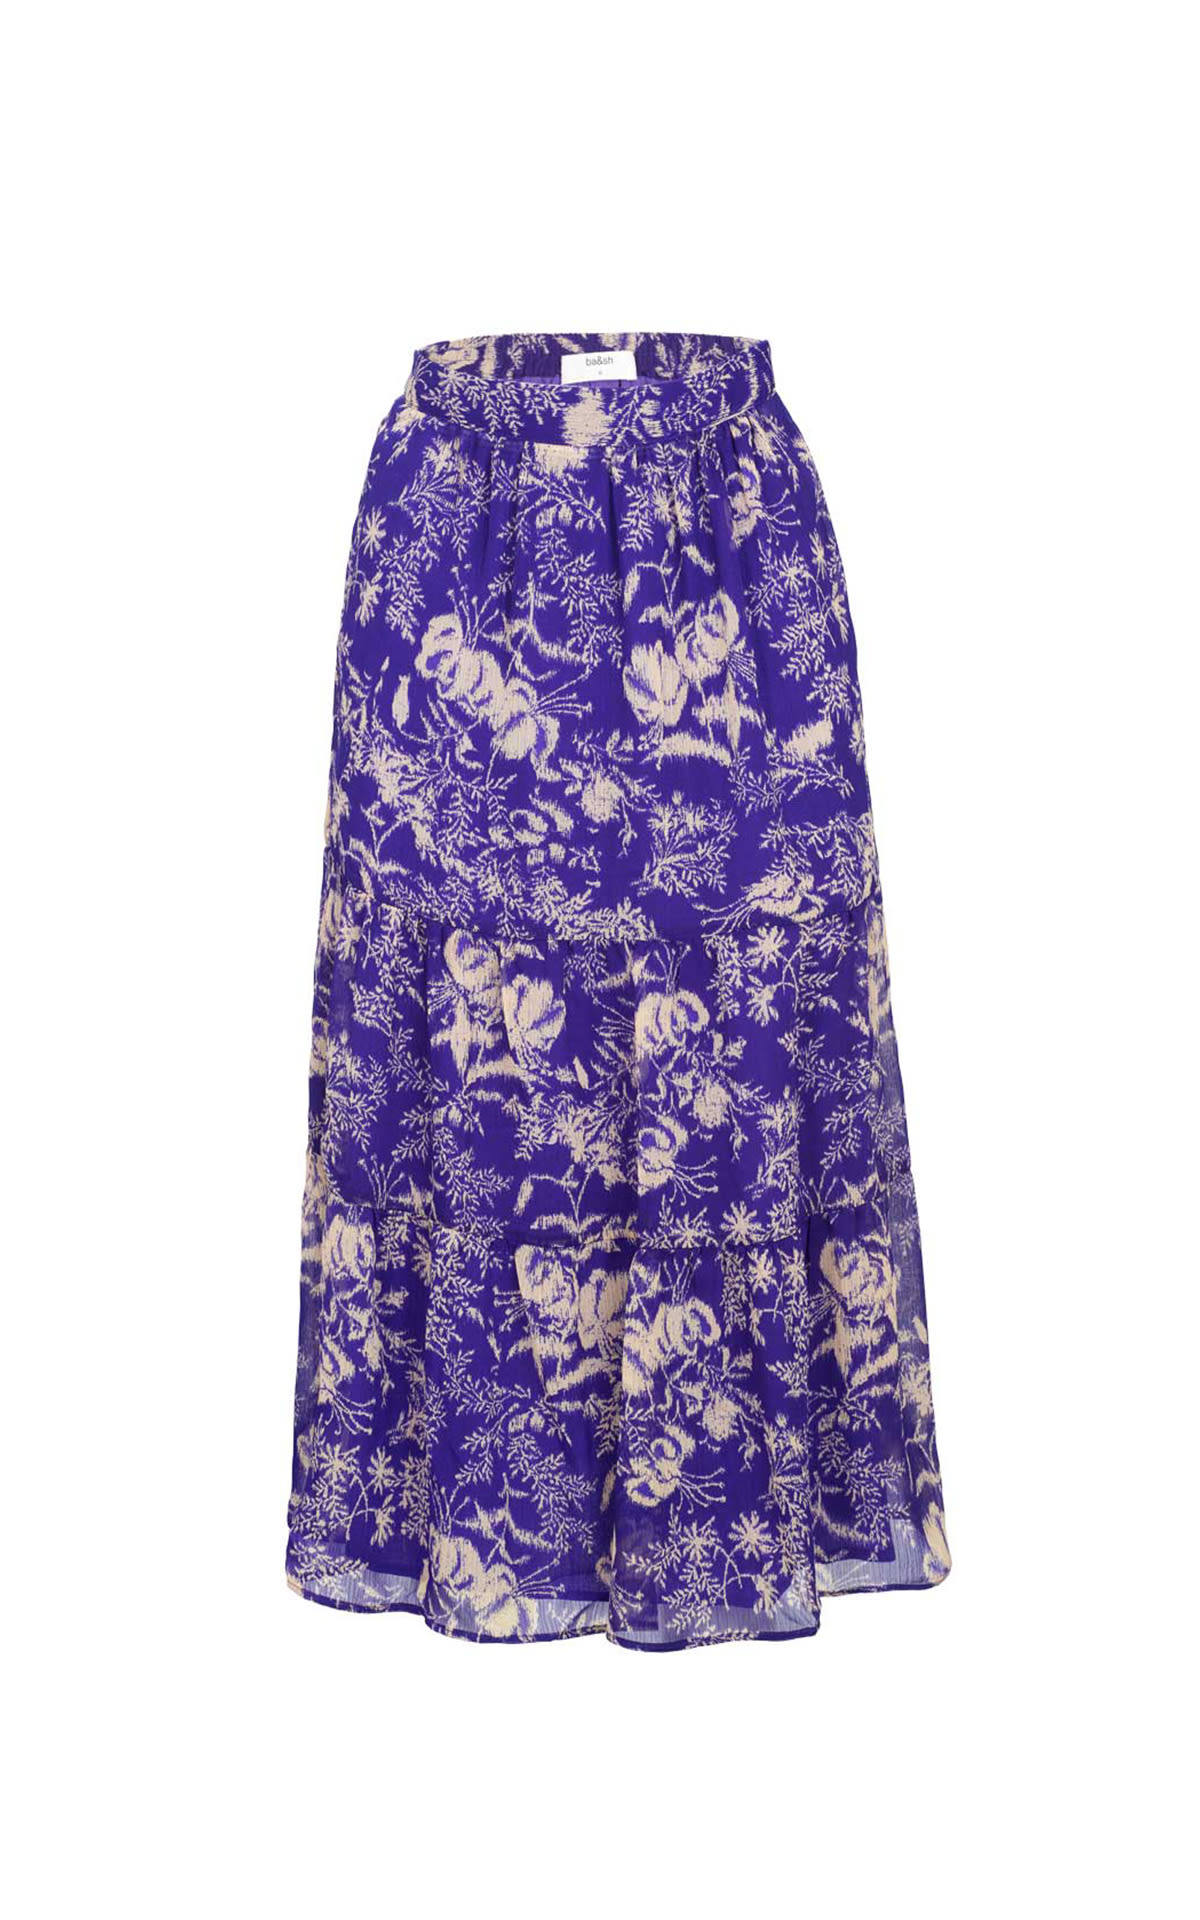 Lilac skirt with floral print ba&sh